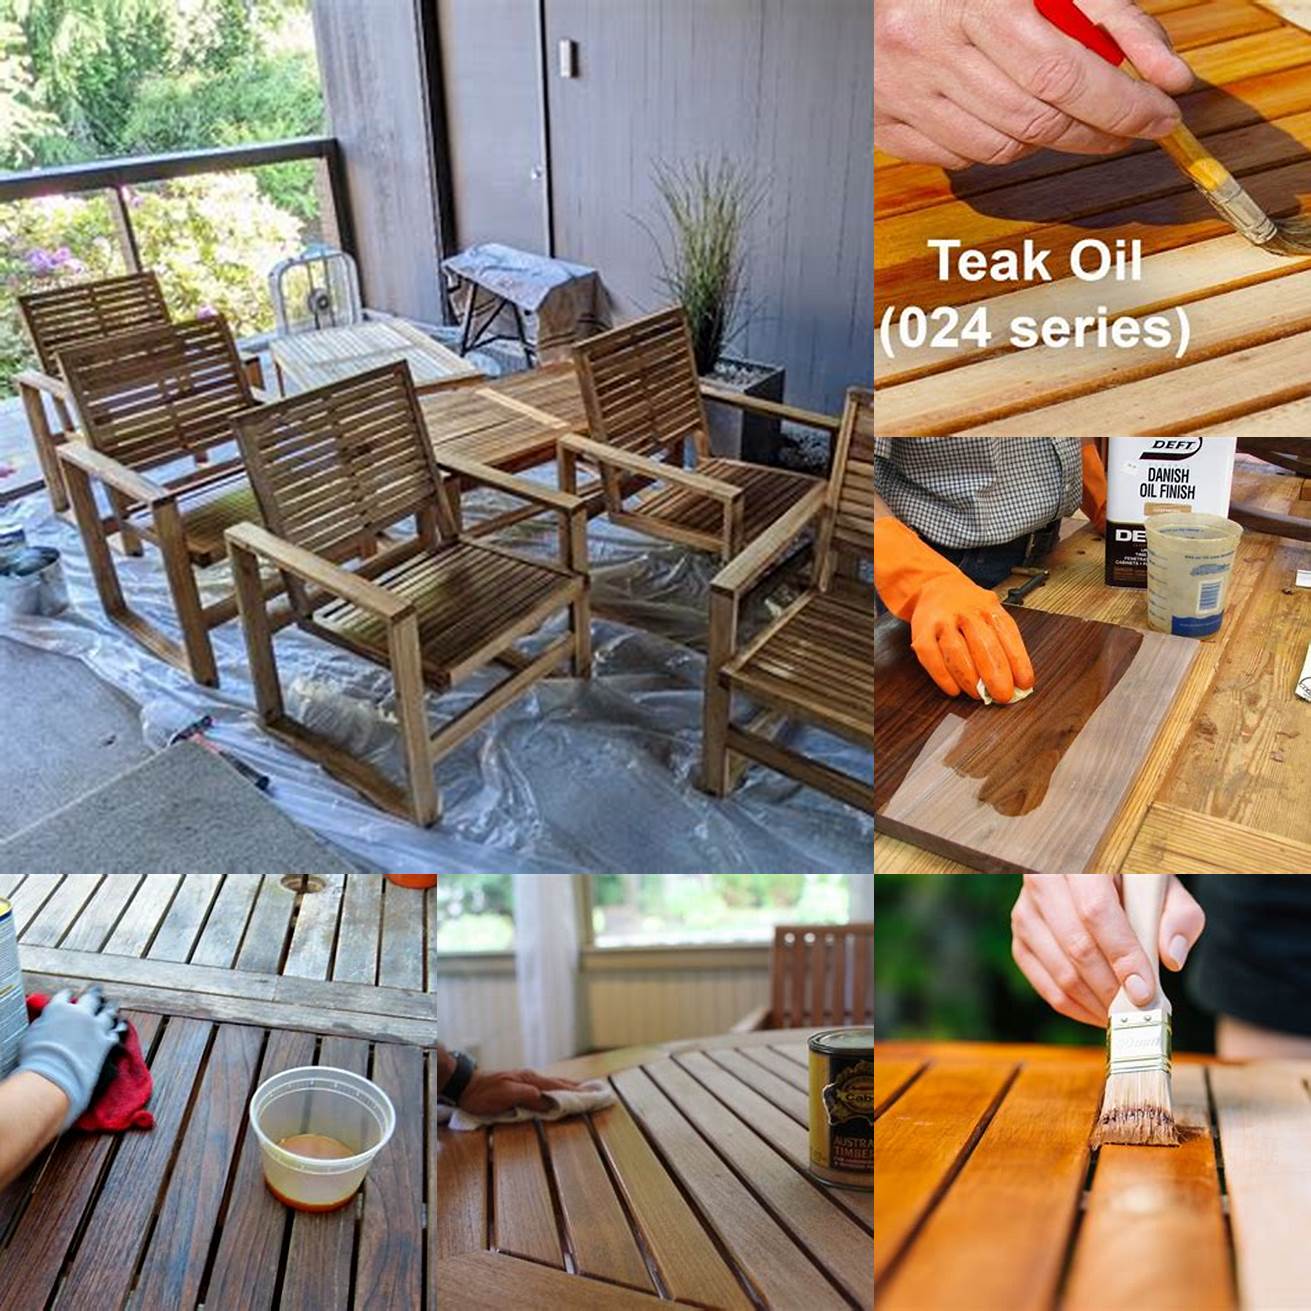 Allow the teak oil to dry completely between coats